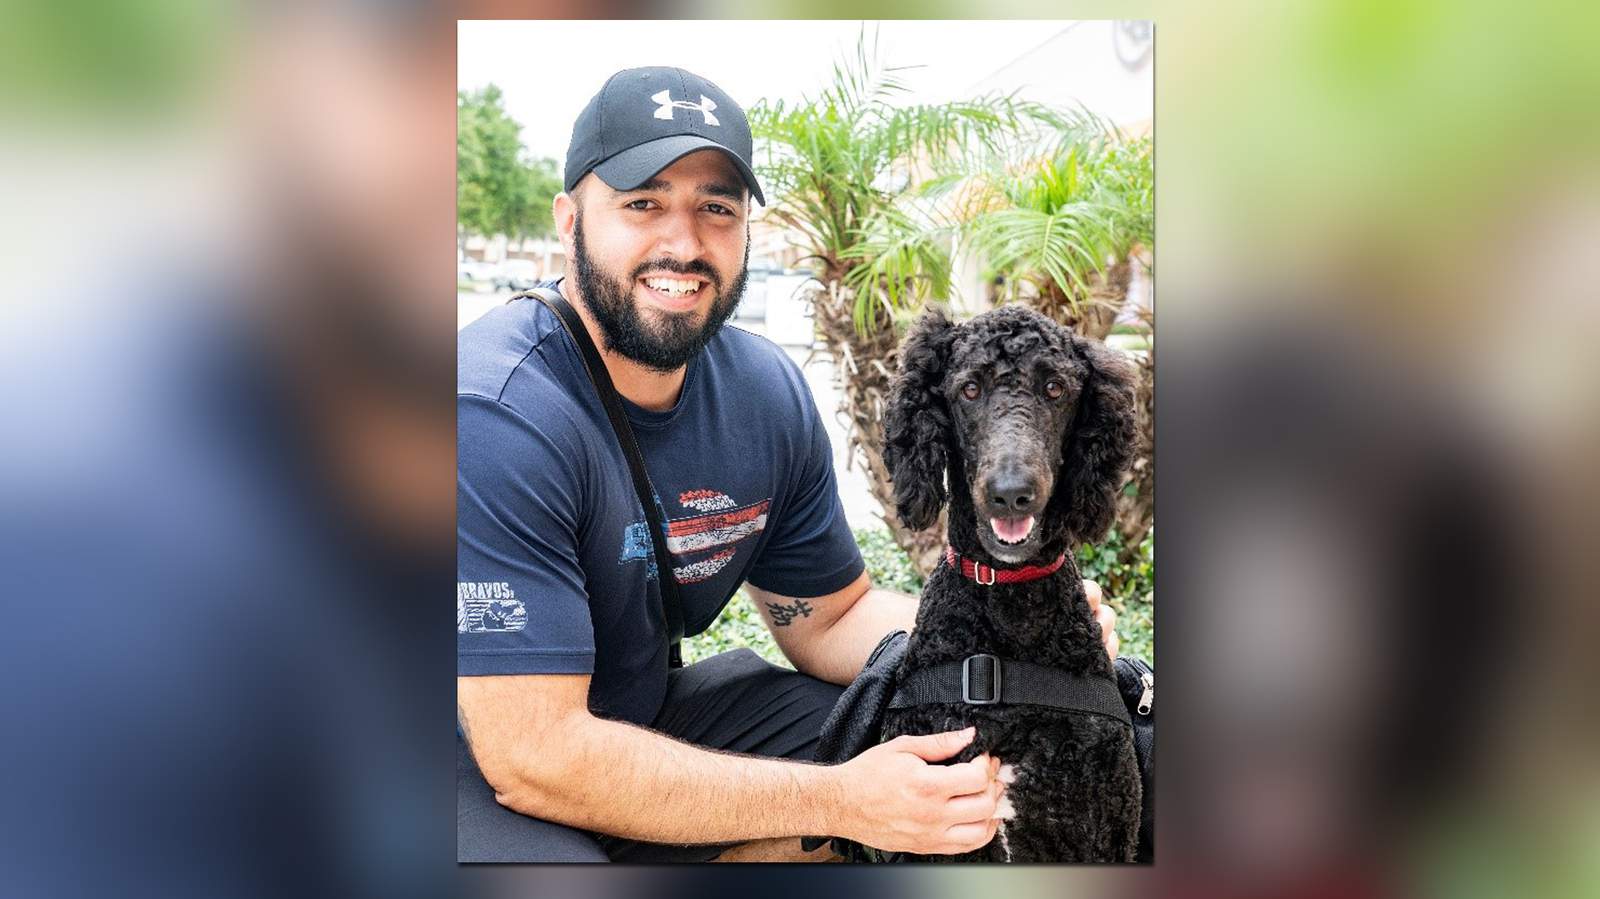 Ponte Vedra veteran thrilled for chance to visit theme park with new service dog